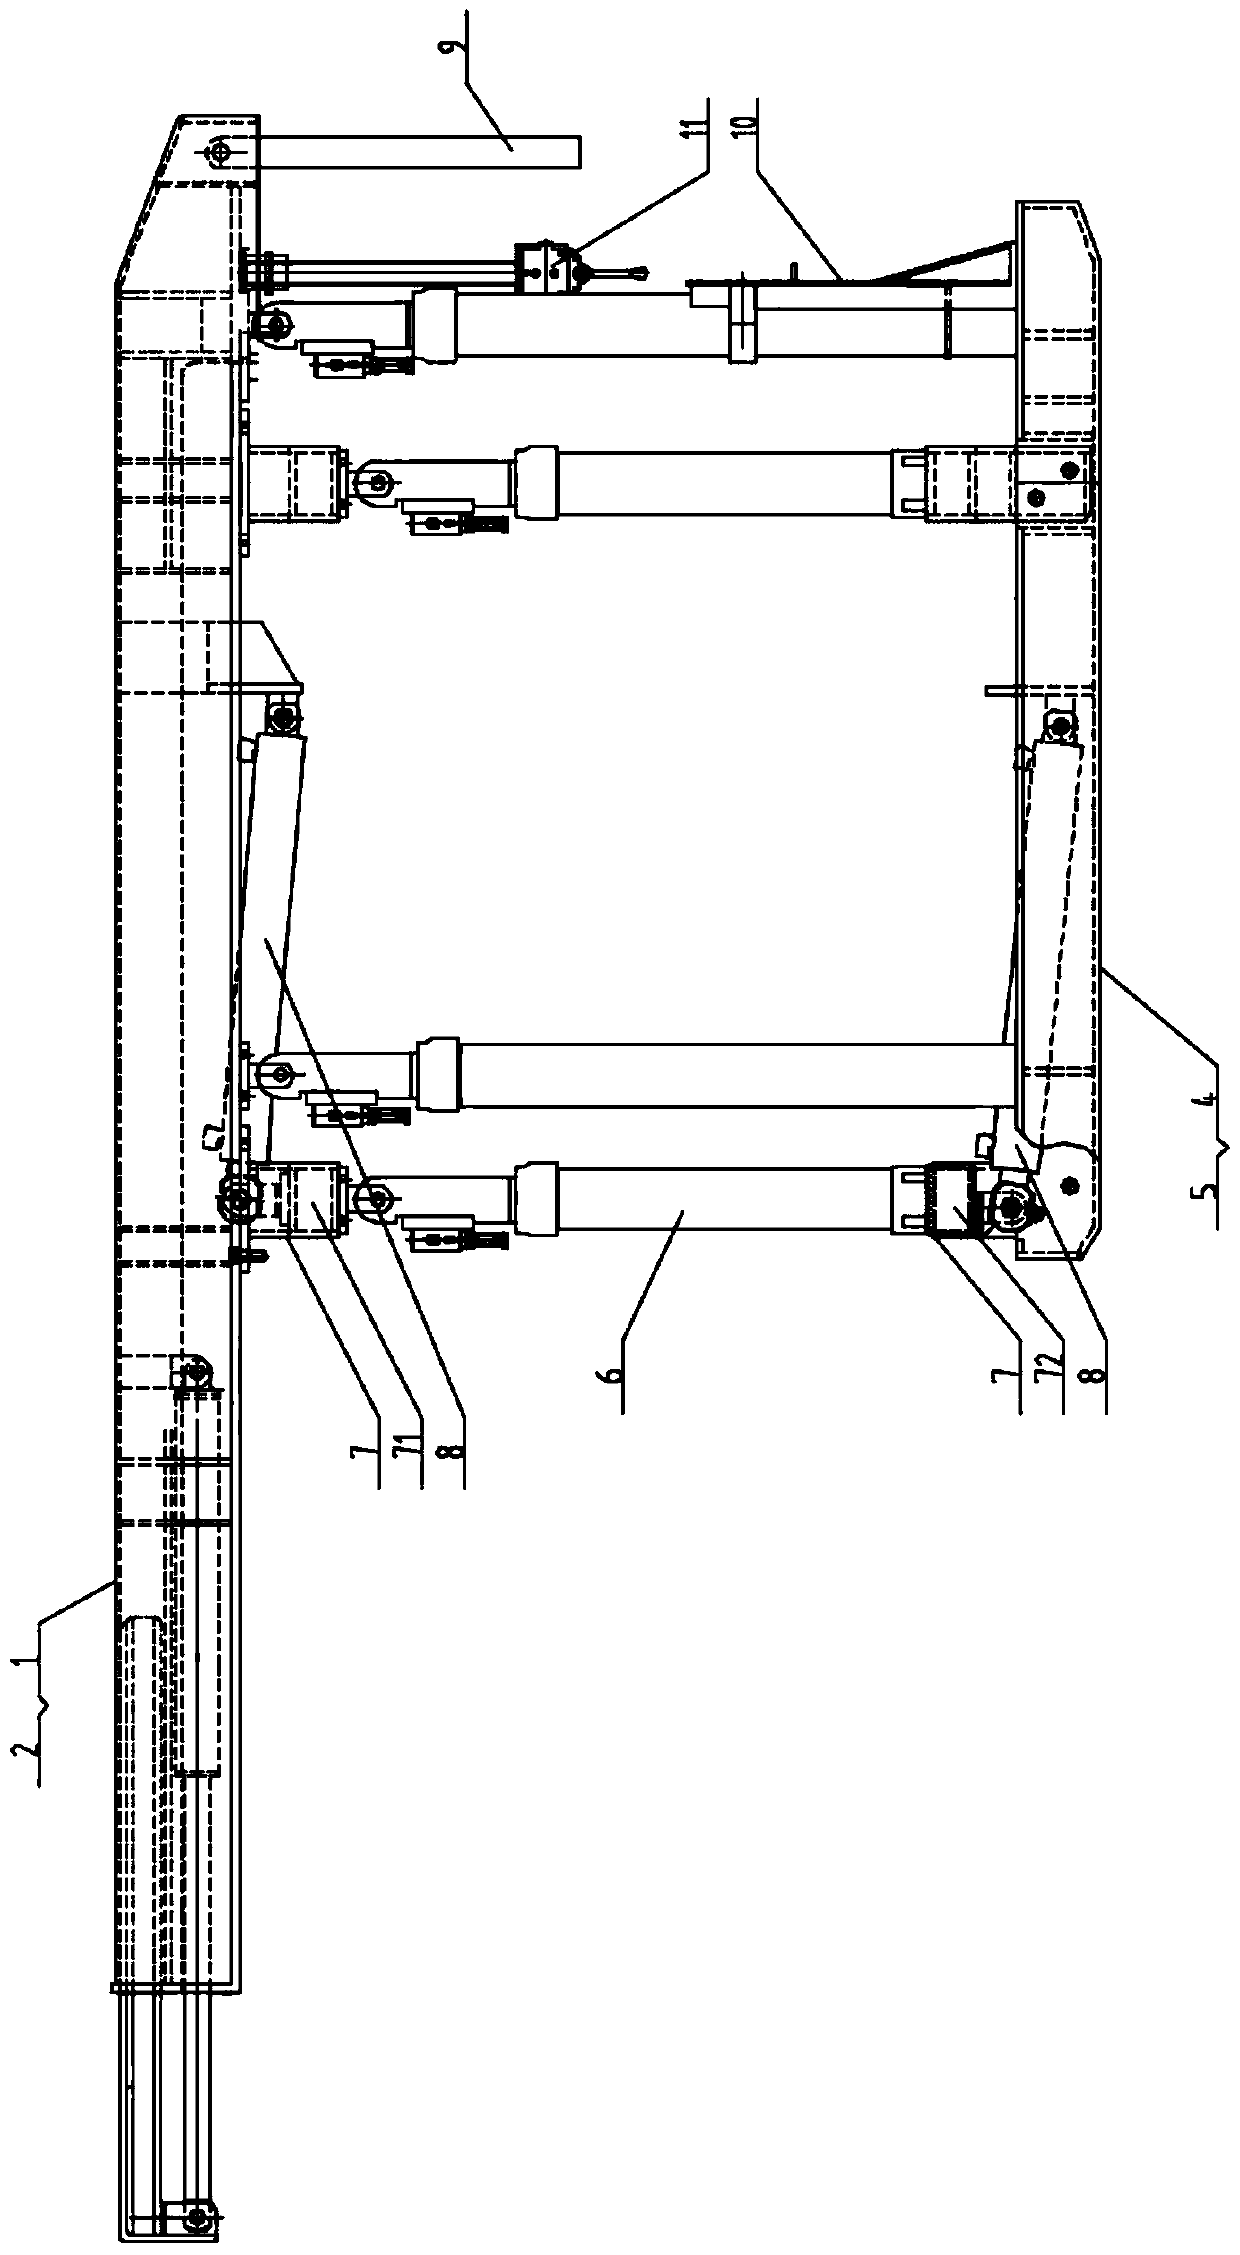 A fully loaded self-moving anti-fall and anti-skid hydraulic support